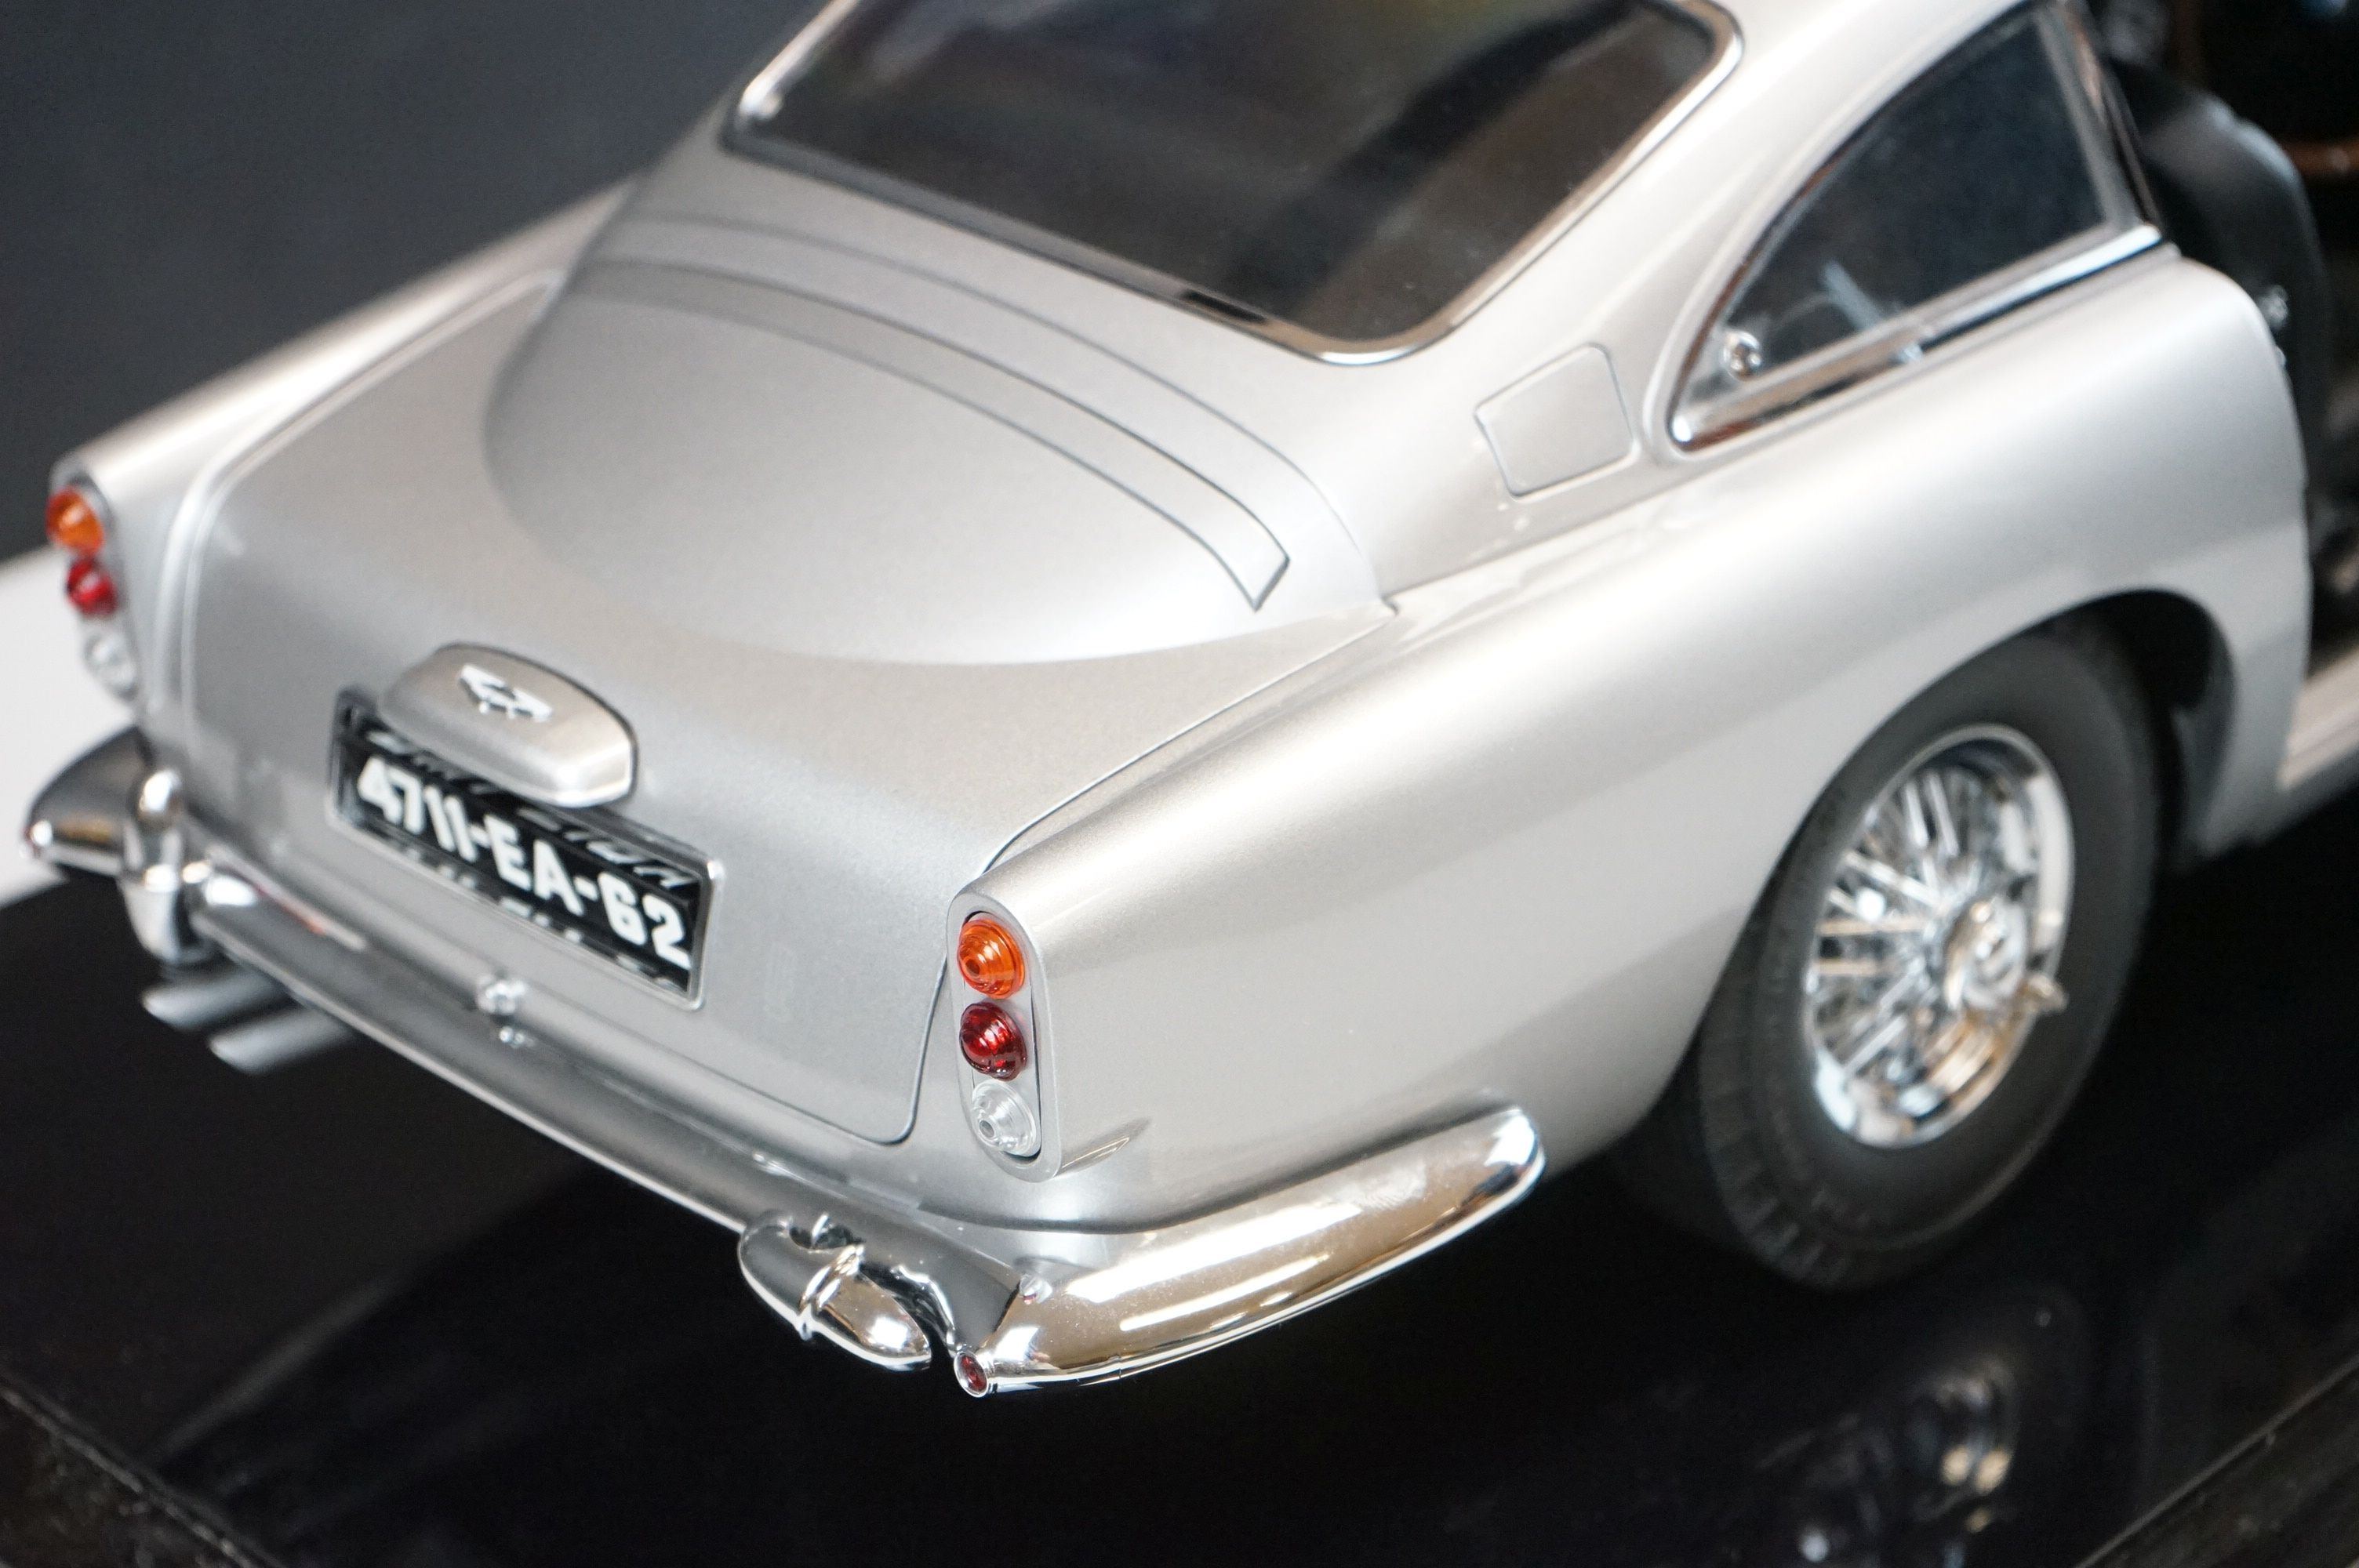 1/8 Scale James Bond Aston Martin DB5 kit built diecast model, produced by Eaglemoss for home - Image 7 of 13